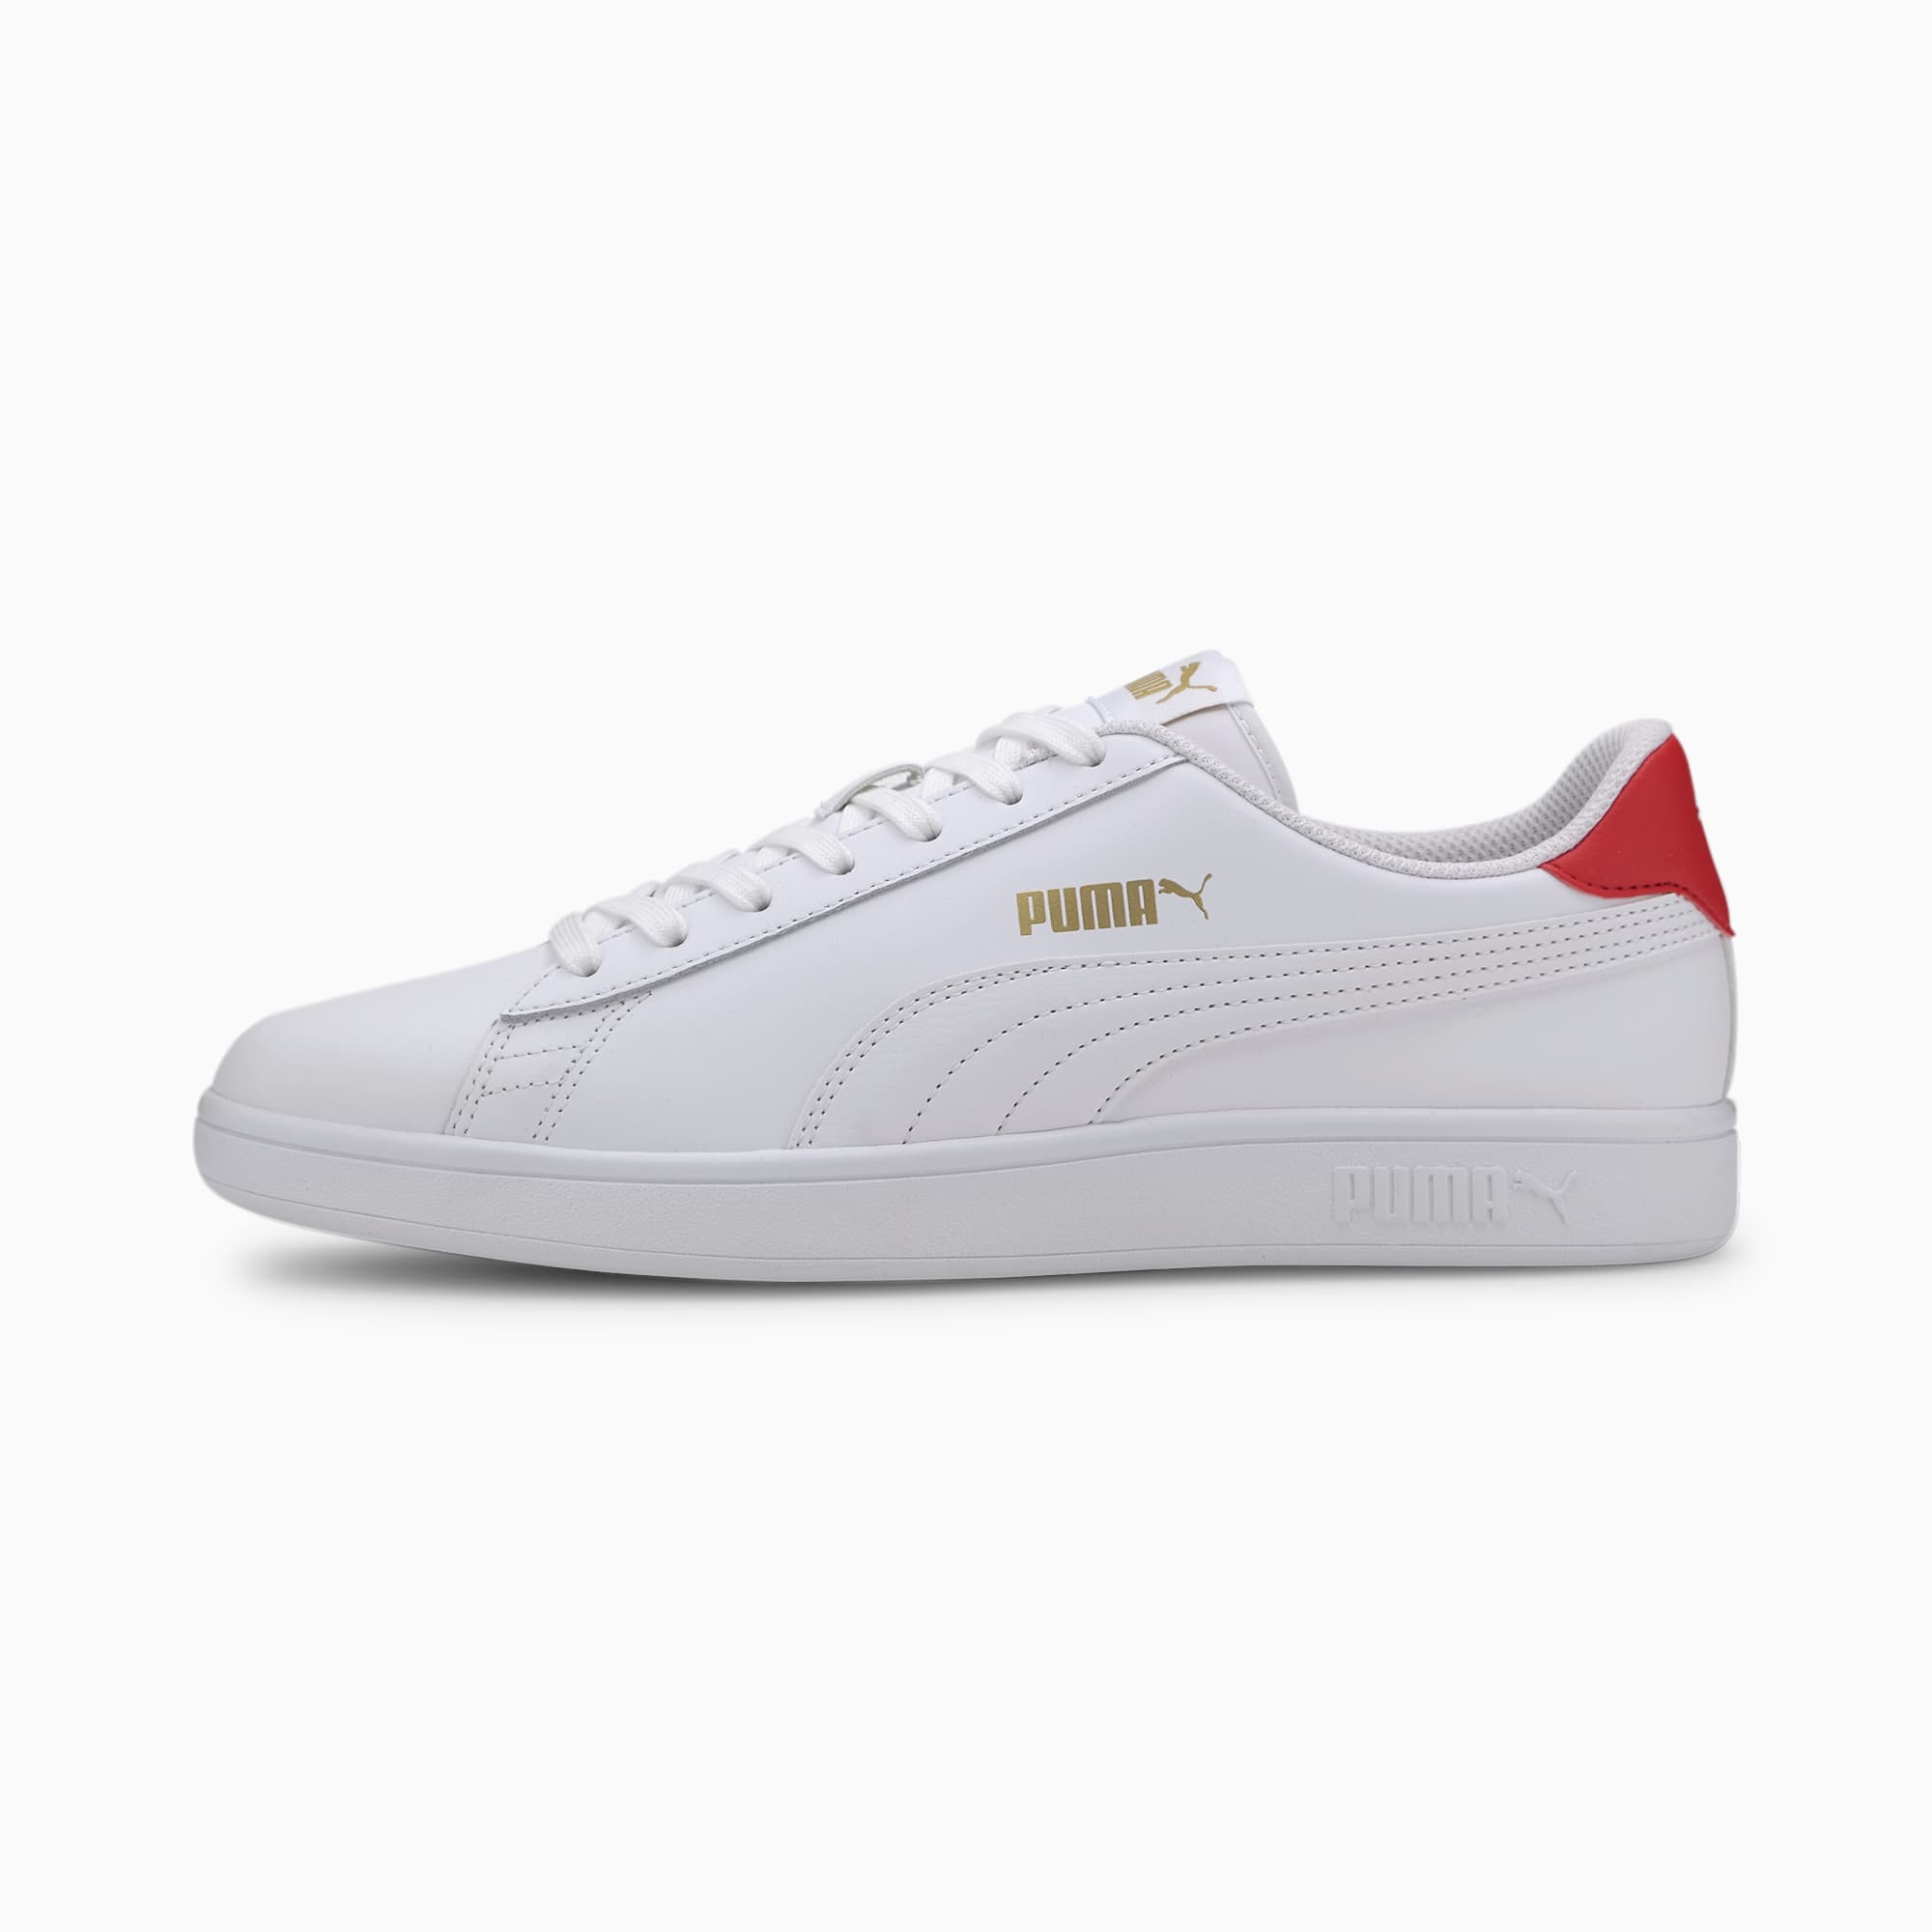 Chaussure Puma Smash v2 L, Or/Rouge/Blanc, Taille 37.5, Chaussures